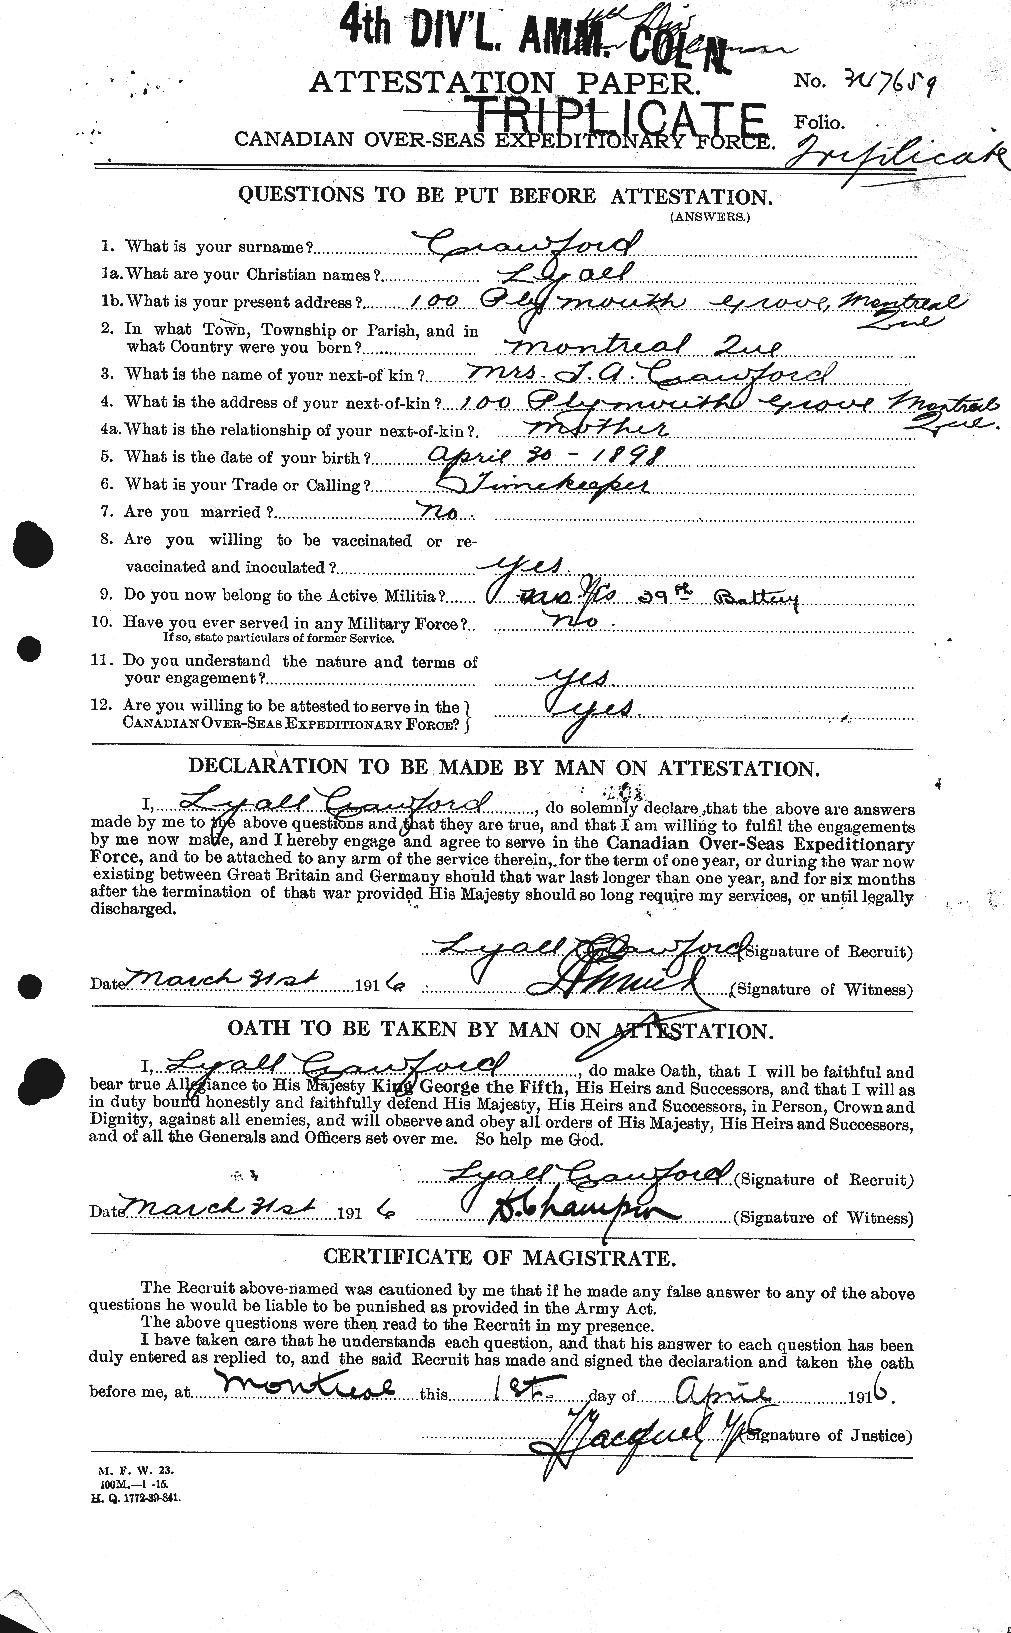 Personnel Records of the First World War - CEF 061787a